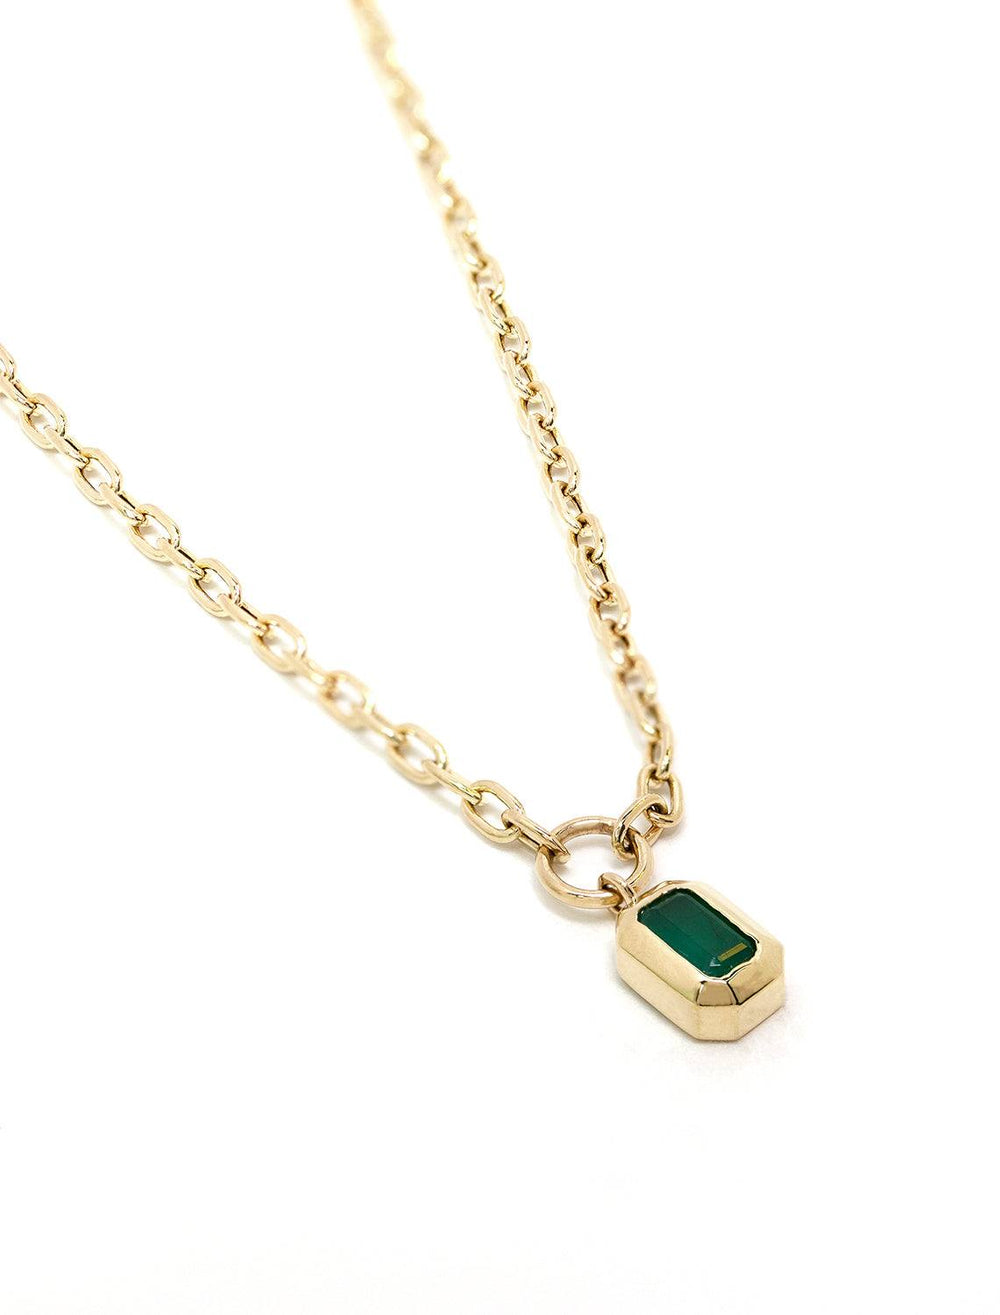 Close-up view of Zoe Chicco's 14k small link chain with bezel set emerald drop necklace.